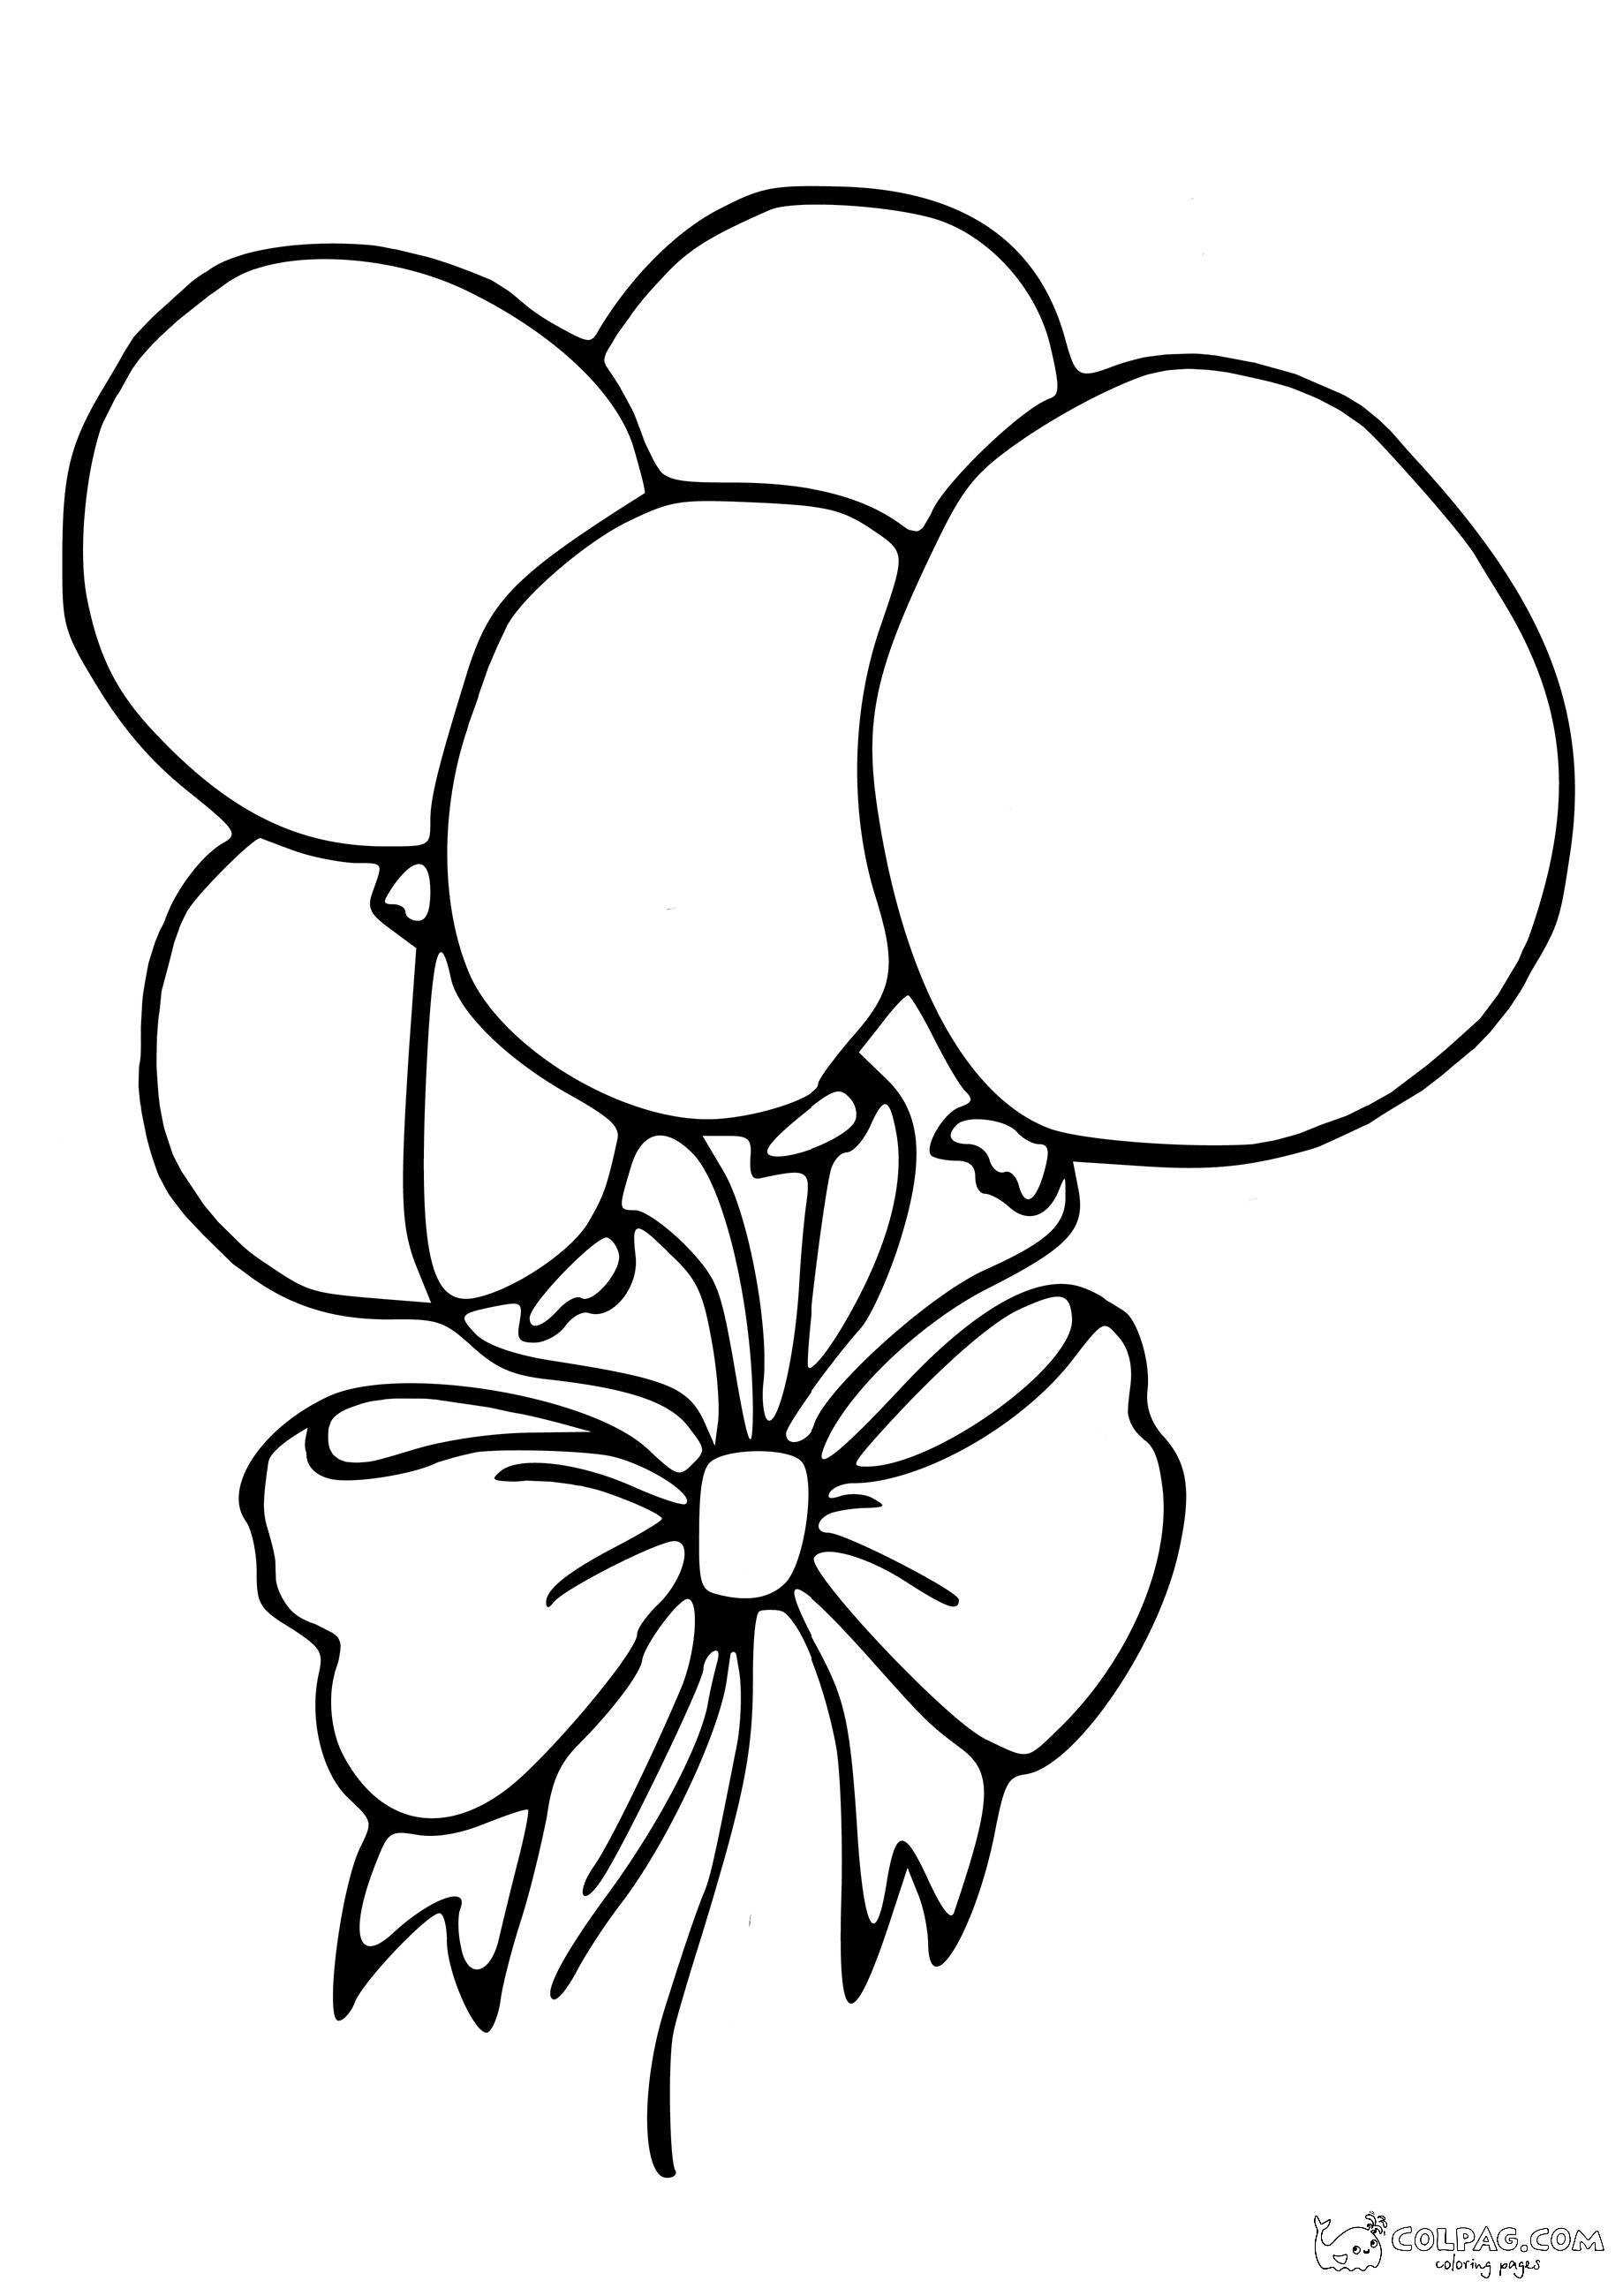 29-huge-baloons-five-coloring-page-colpag-29